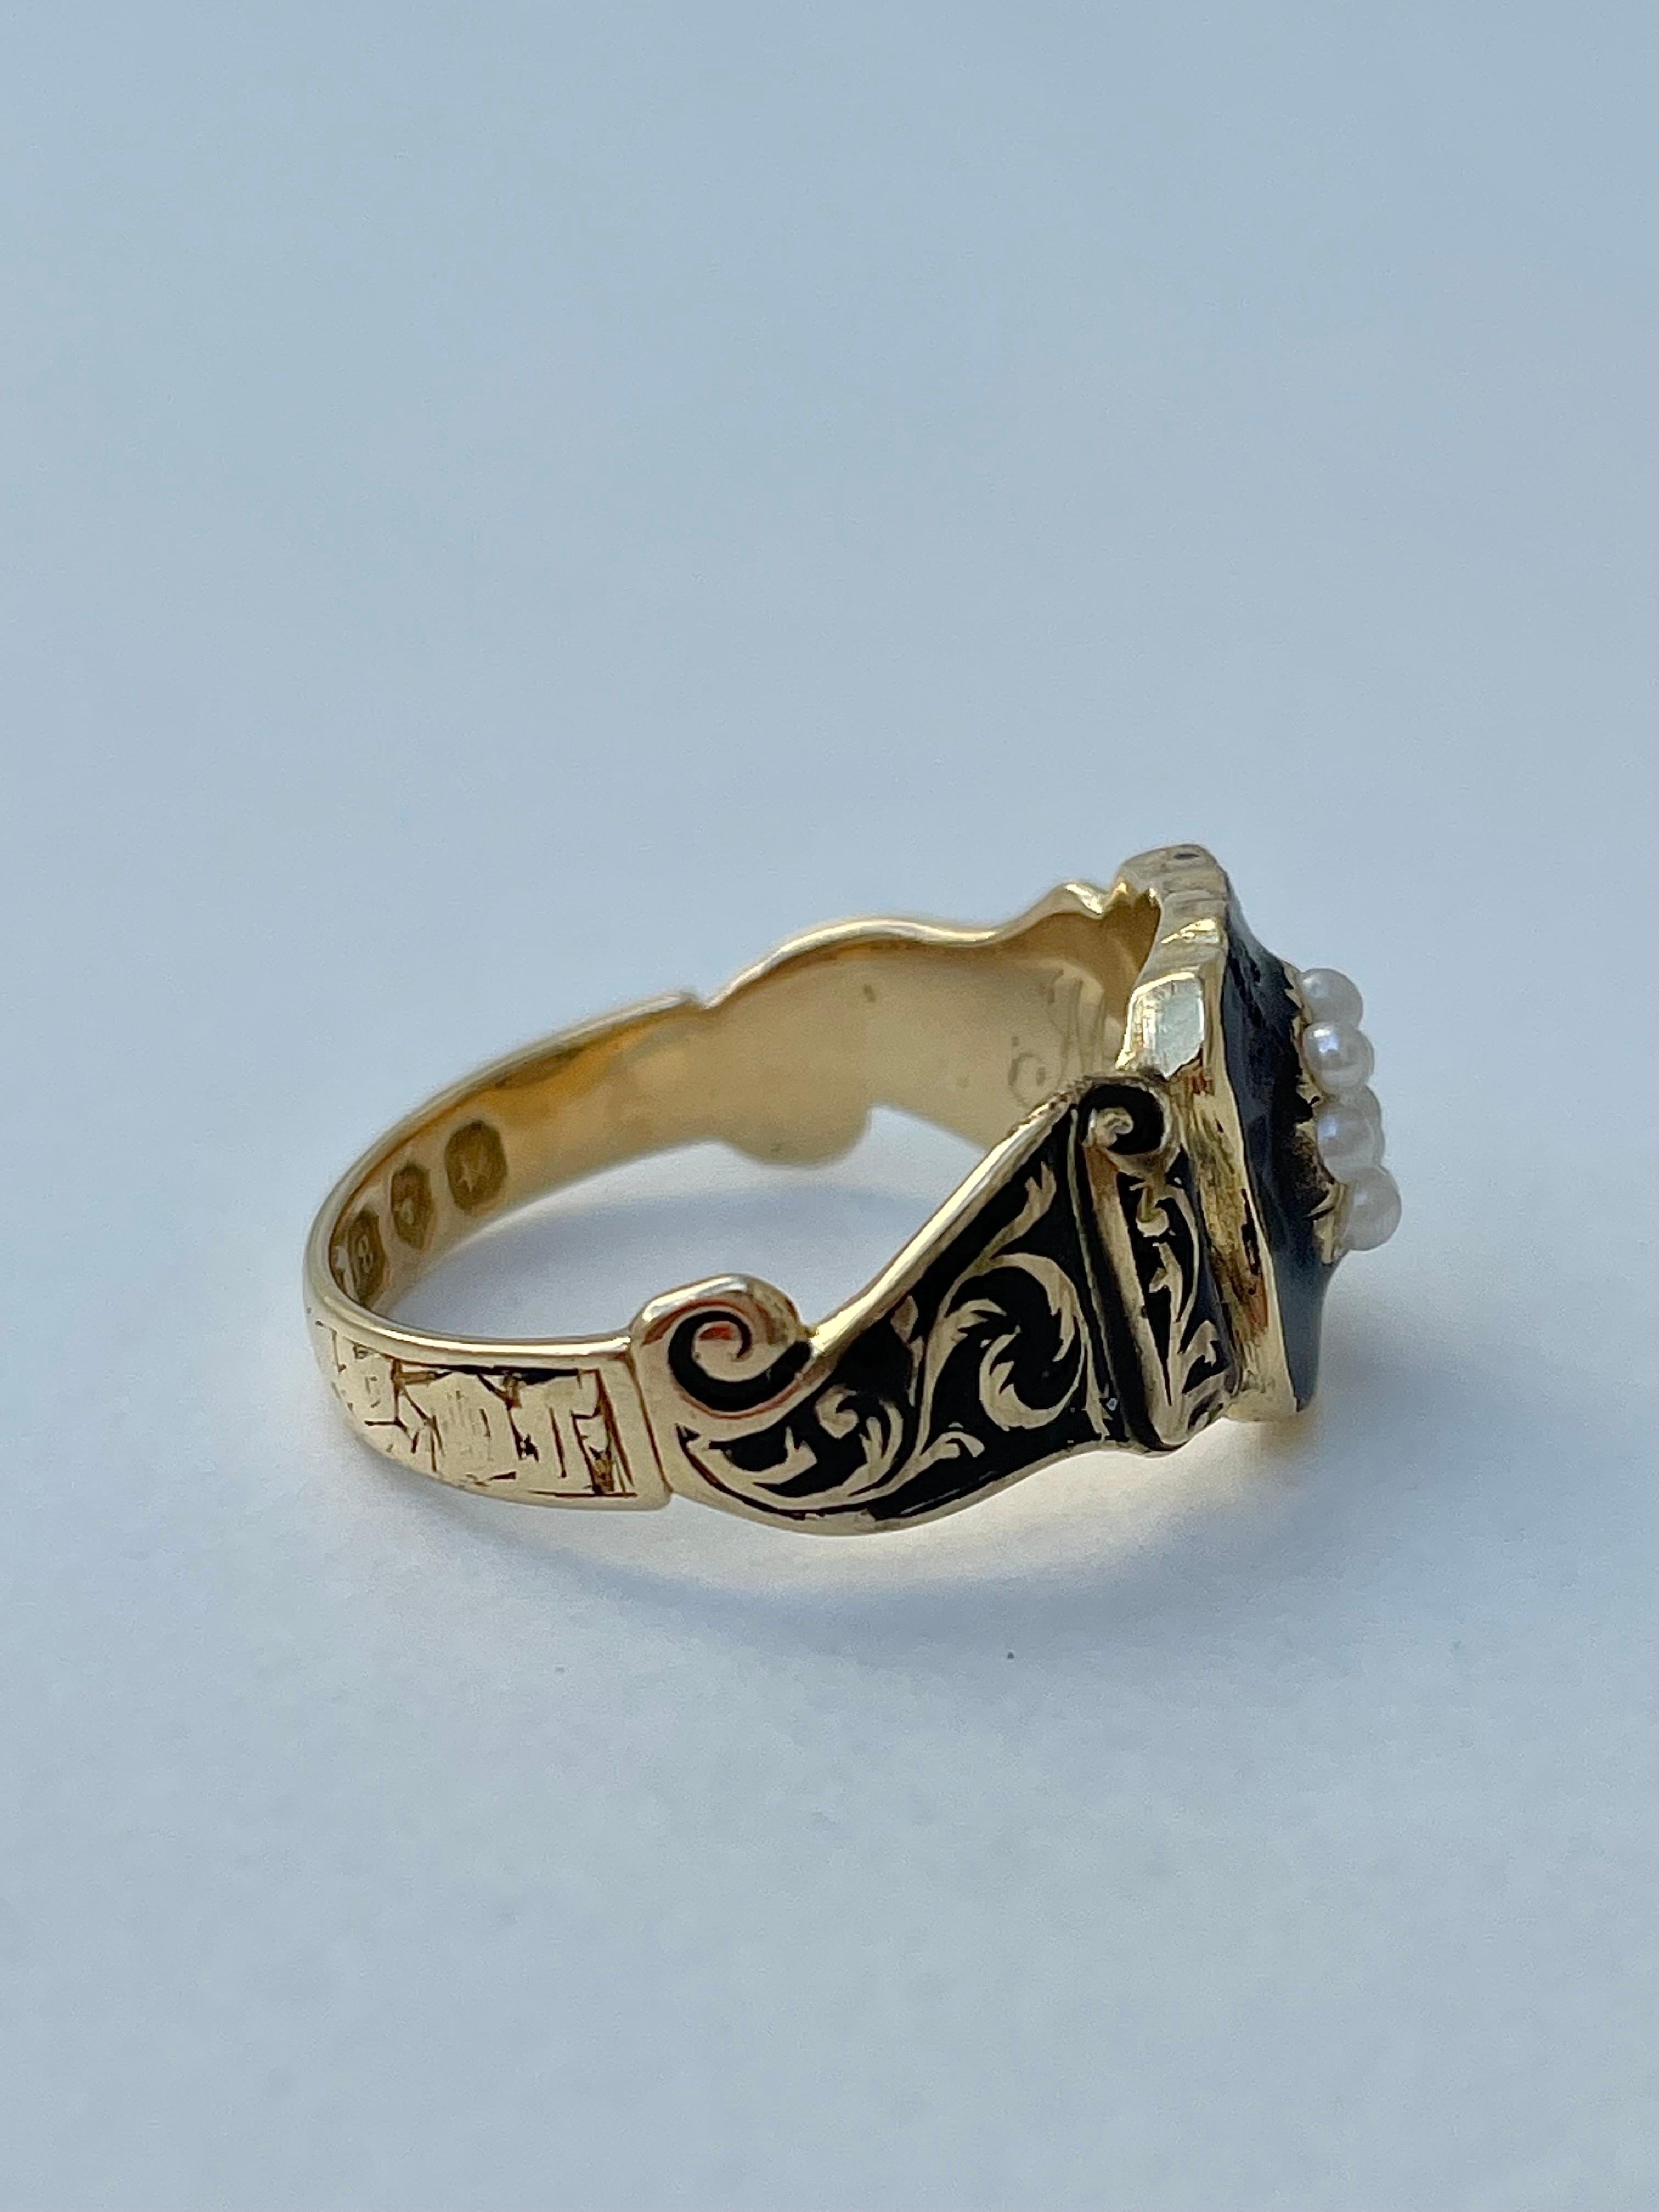 Victorian Antique Black Enamel and Pearl Mourning Ring in 18ct Yellow Gold, C.1850